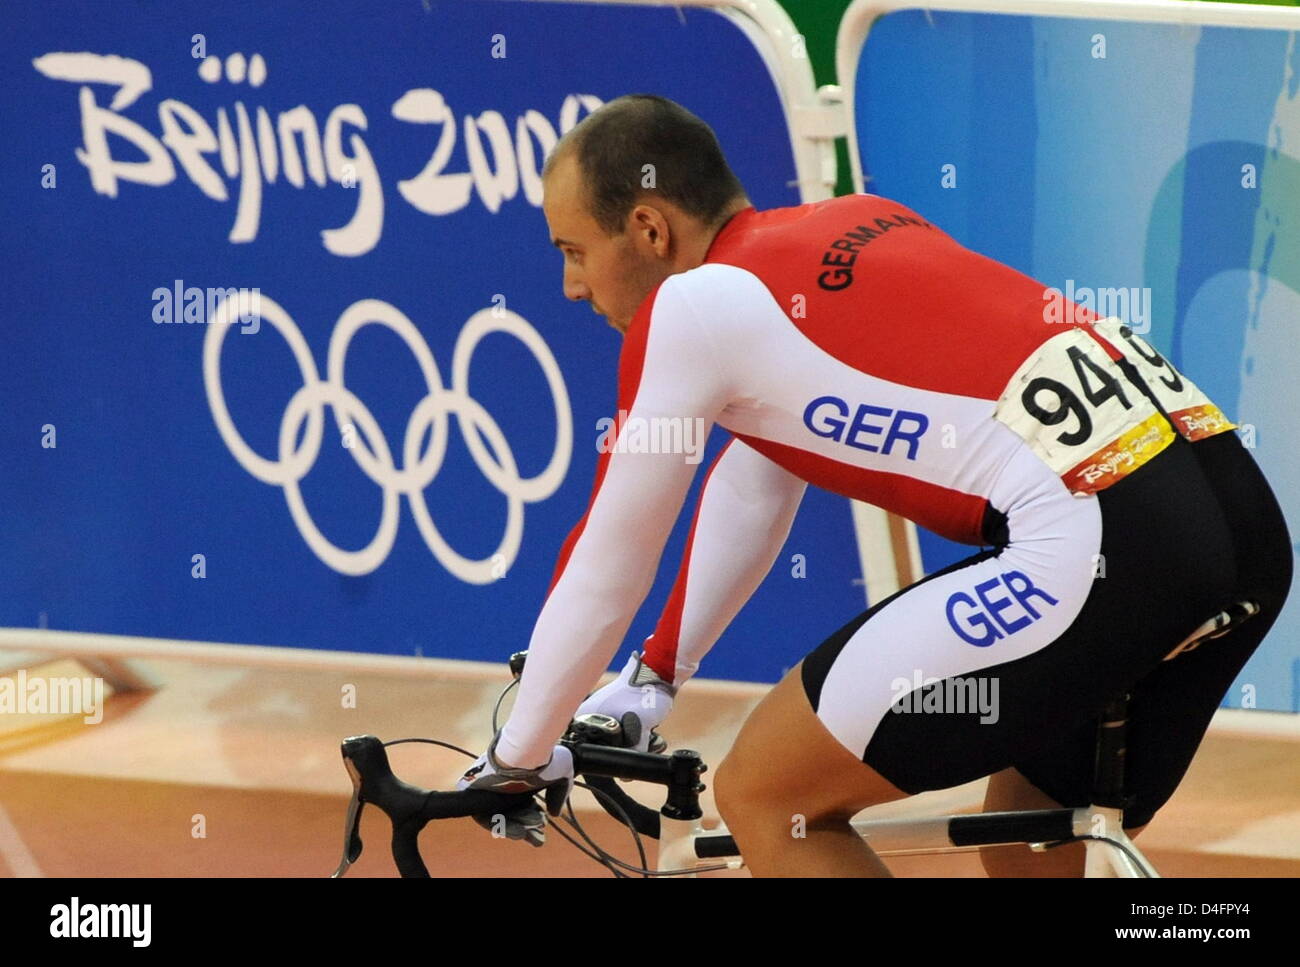 Maximilian Levy of Germany is pictured in the Men's Sprint Semifinals in the Cycling - Track competition at Laoshan Velodrome at the Beijing 2008 Olympic Games, Beijing, China, 19 August 2008. Photo: Peer Grimm dpa ###dpa### Stock Photo